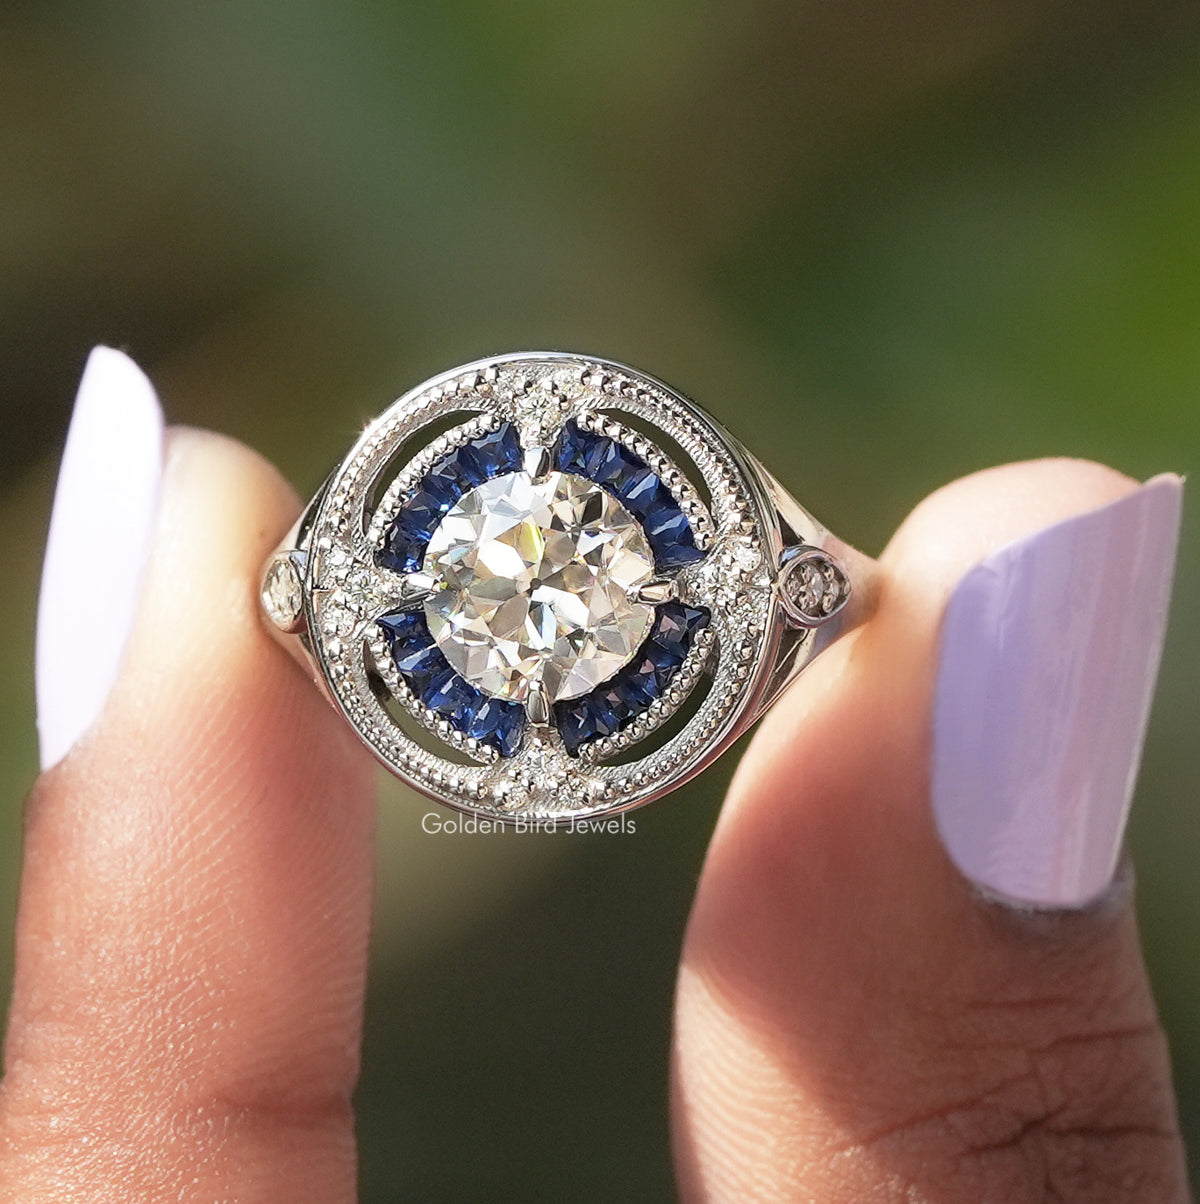 [Old european round cut moissanite ring made of white gold]-[Golden Bird Jewels]